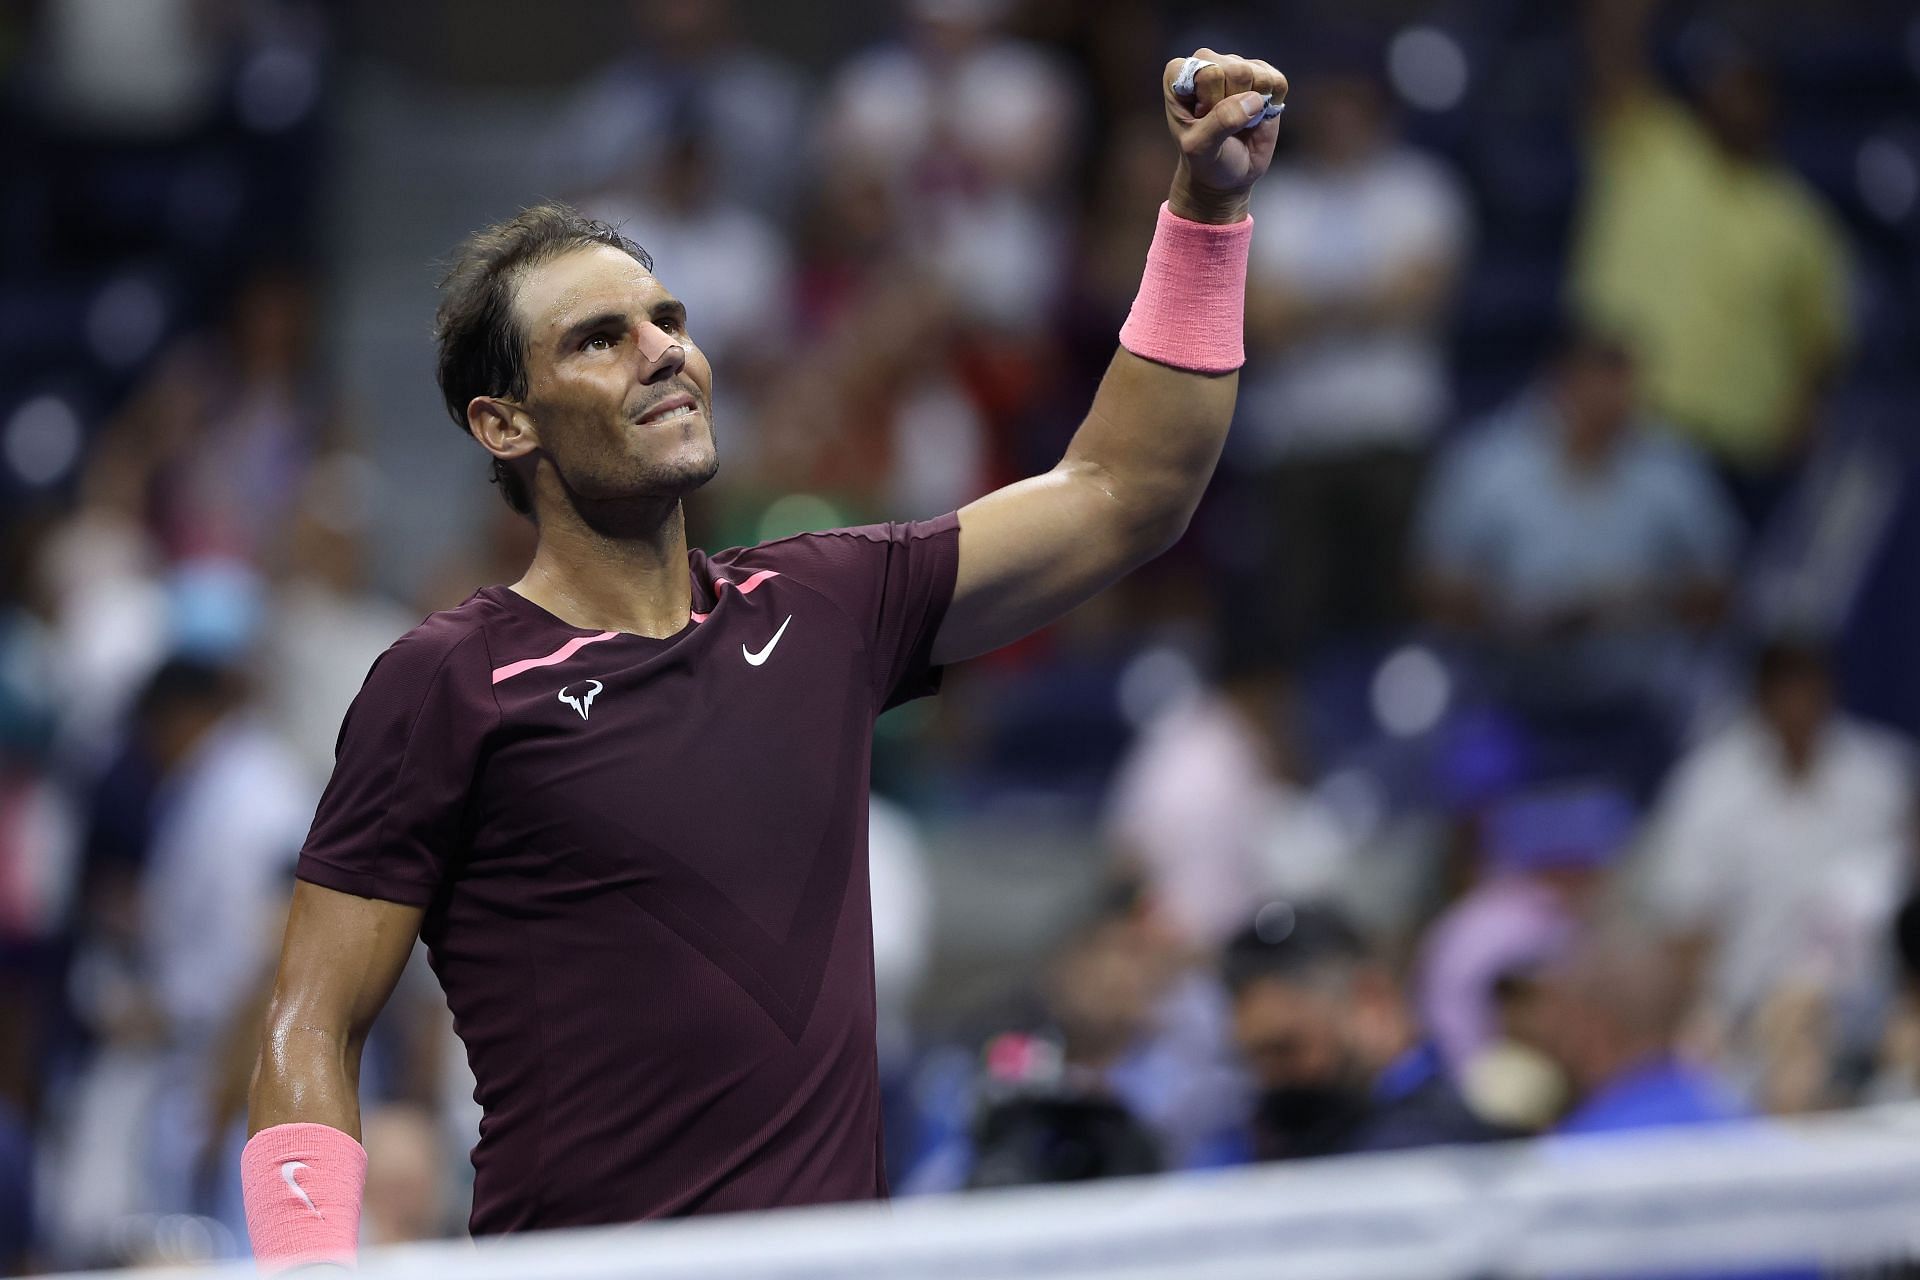 Rafael Nadal celebrates after defeating Fabio Fognini at the 2022 US Open.